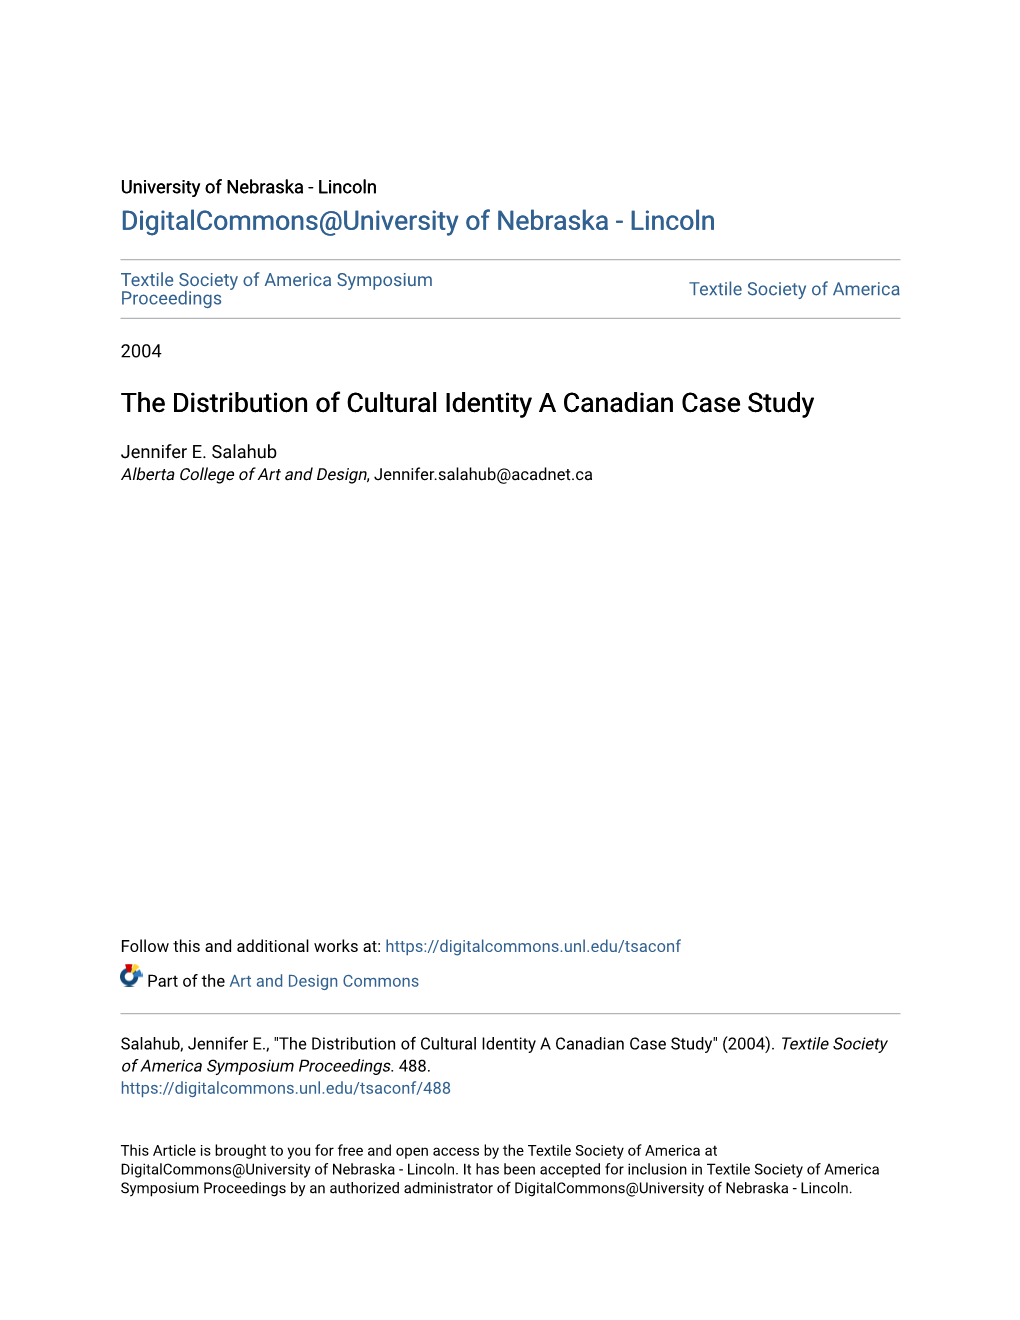 The Distribution of Cultural Identity a Canadian Case Study